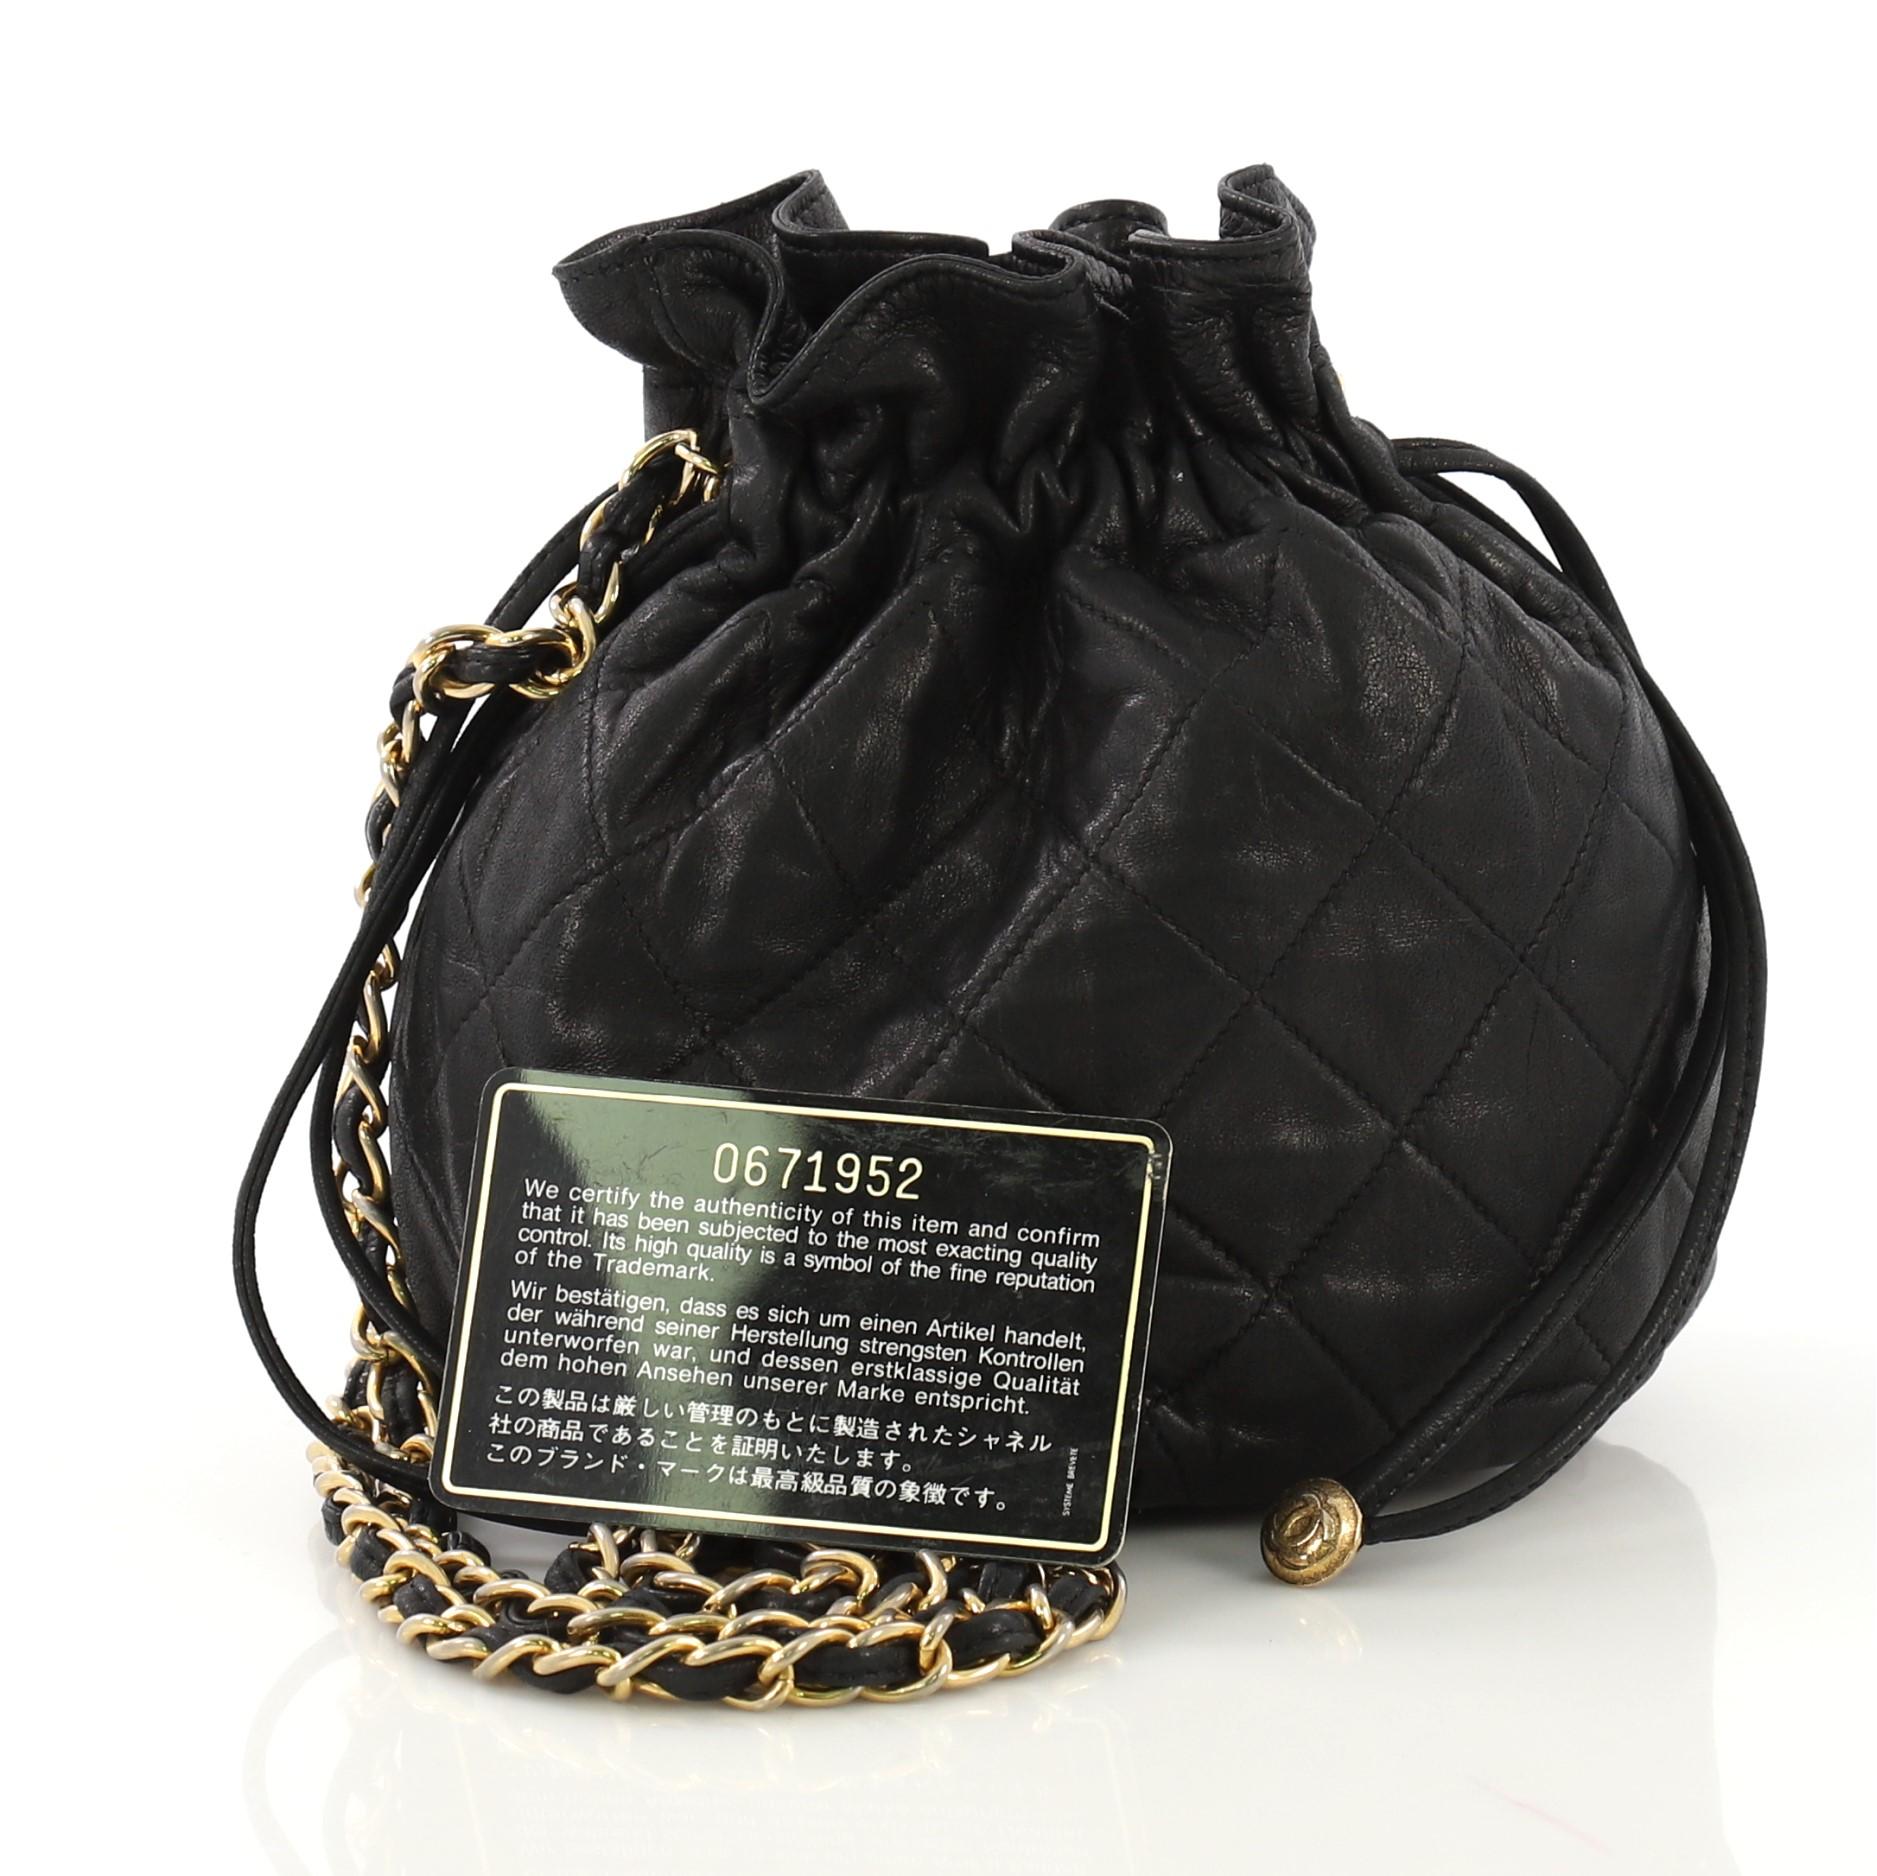 This Chanel Vintage Drawstring Bucket Bag Quilted Lambskin Mini, crafted in black quilted lambskin leather, features woven-in leather chain strap and gold-tone hardware. Its drawstring closure opens to a black leather interior. Hologram sticker